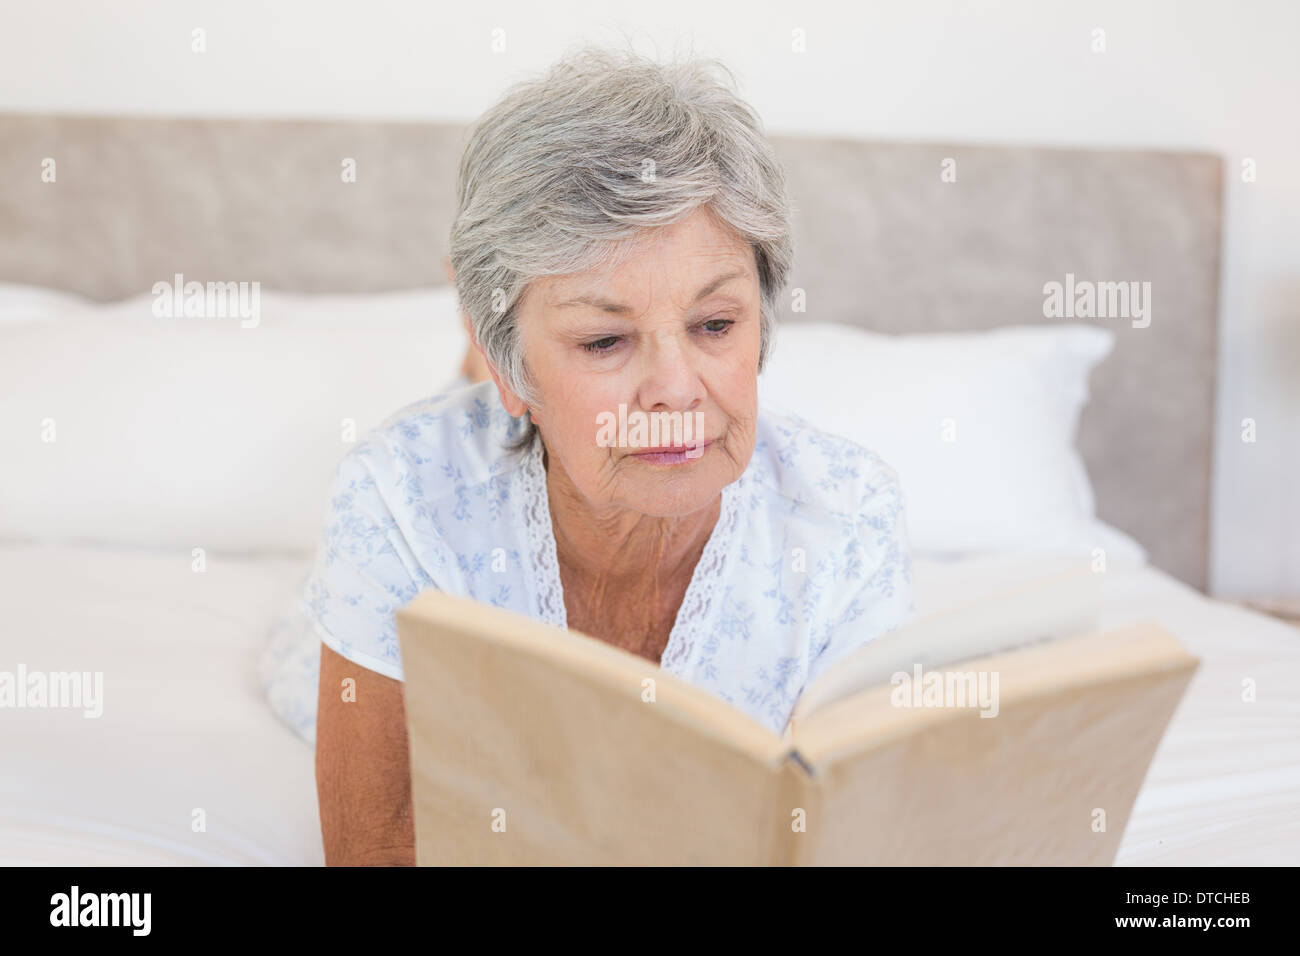 Senior woman reading story book in bed Stock Photo